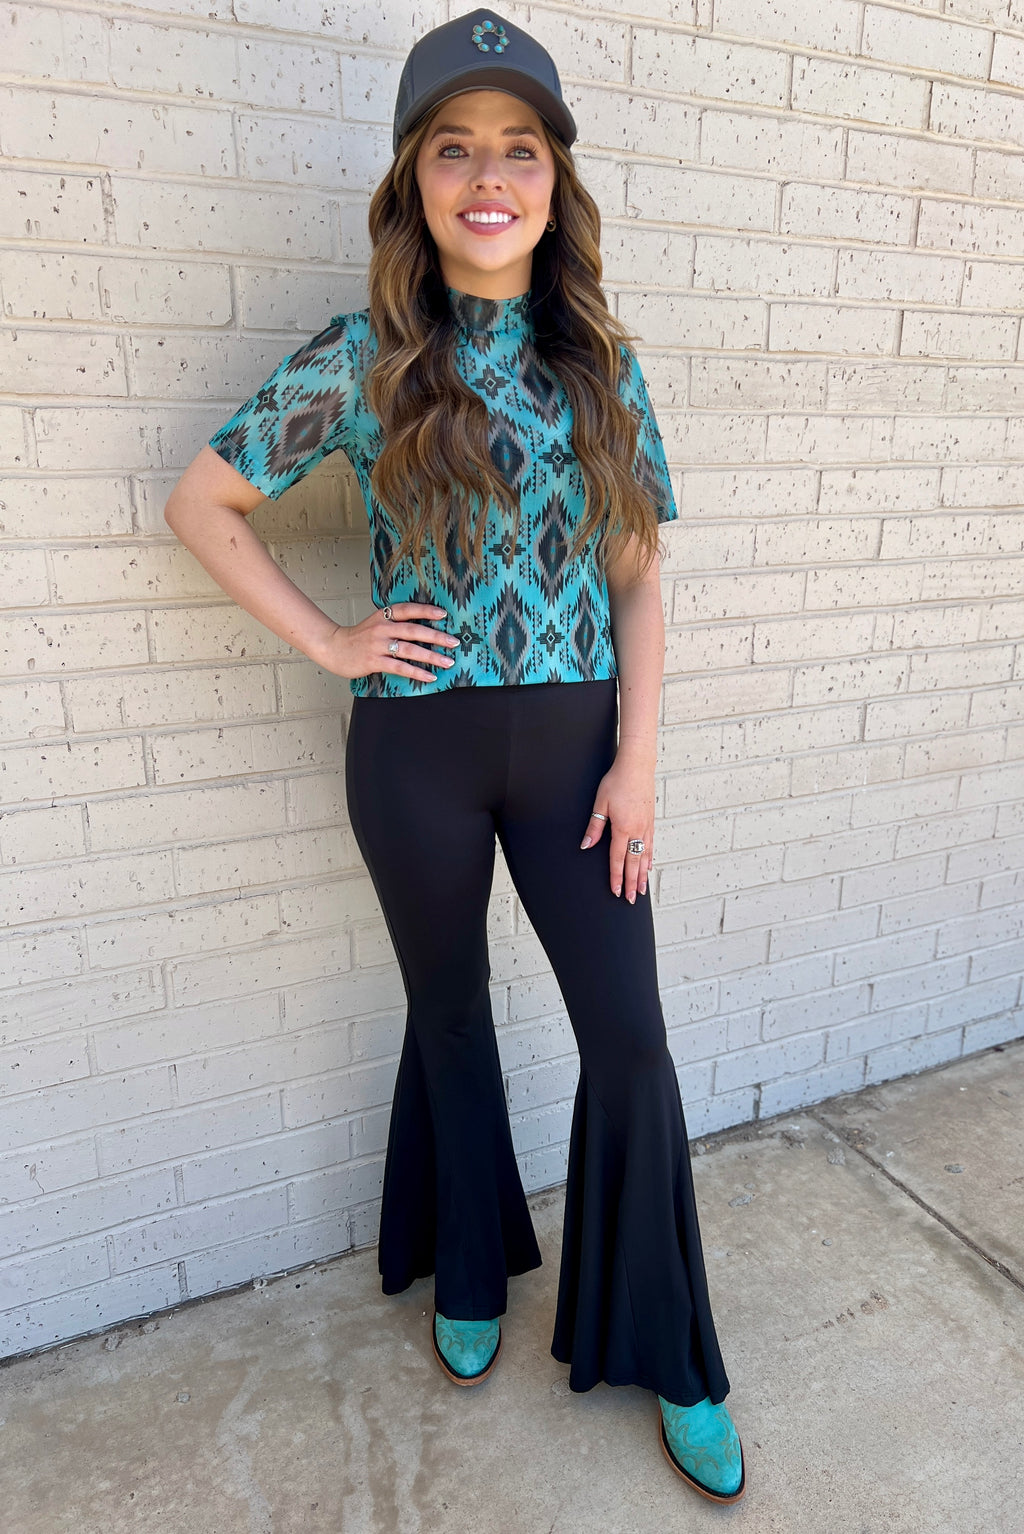 Sterling Kreek Bell Bottoms. Bell Bottoms. black pants. High waisted pants. black Bell bottoms. Stretchy pants. Comfortable pants. Western style. Women's western wear. Women's black pants. Women's western boutique. Women's western wear. Online boutique. Small business. Woman owned. 